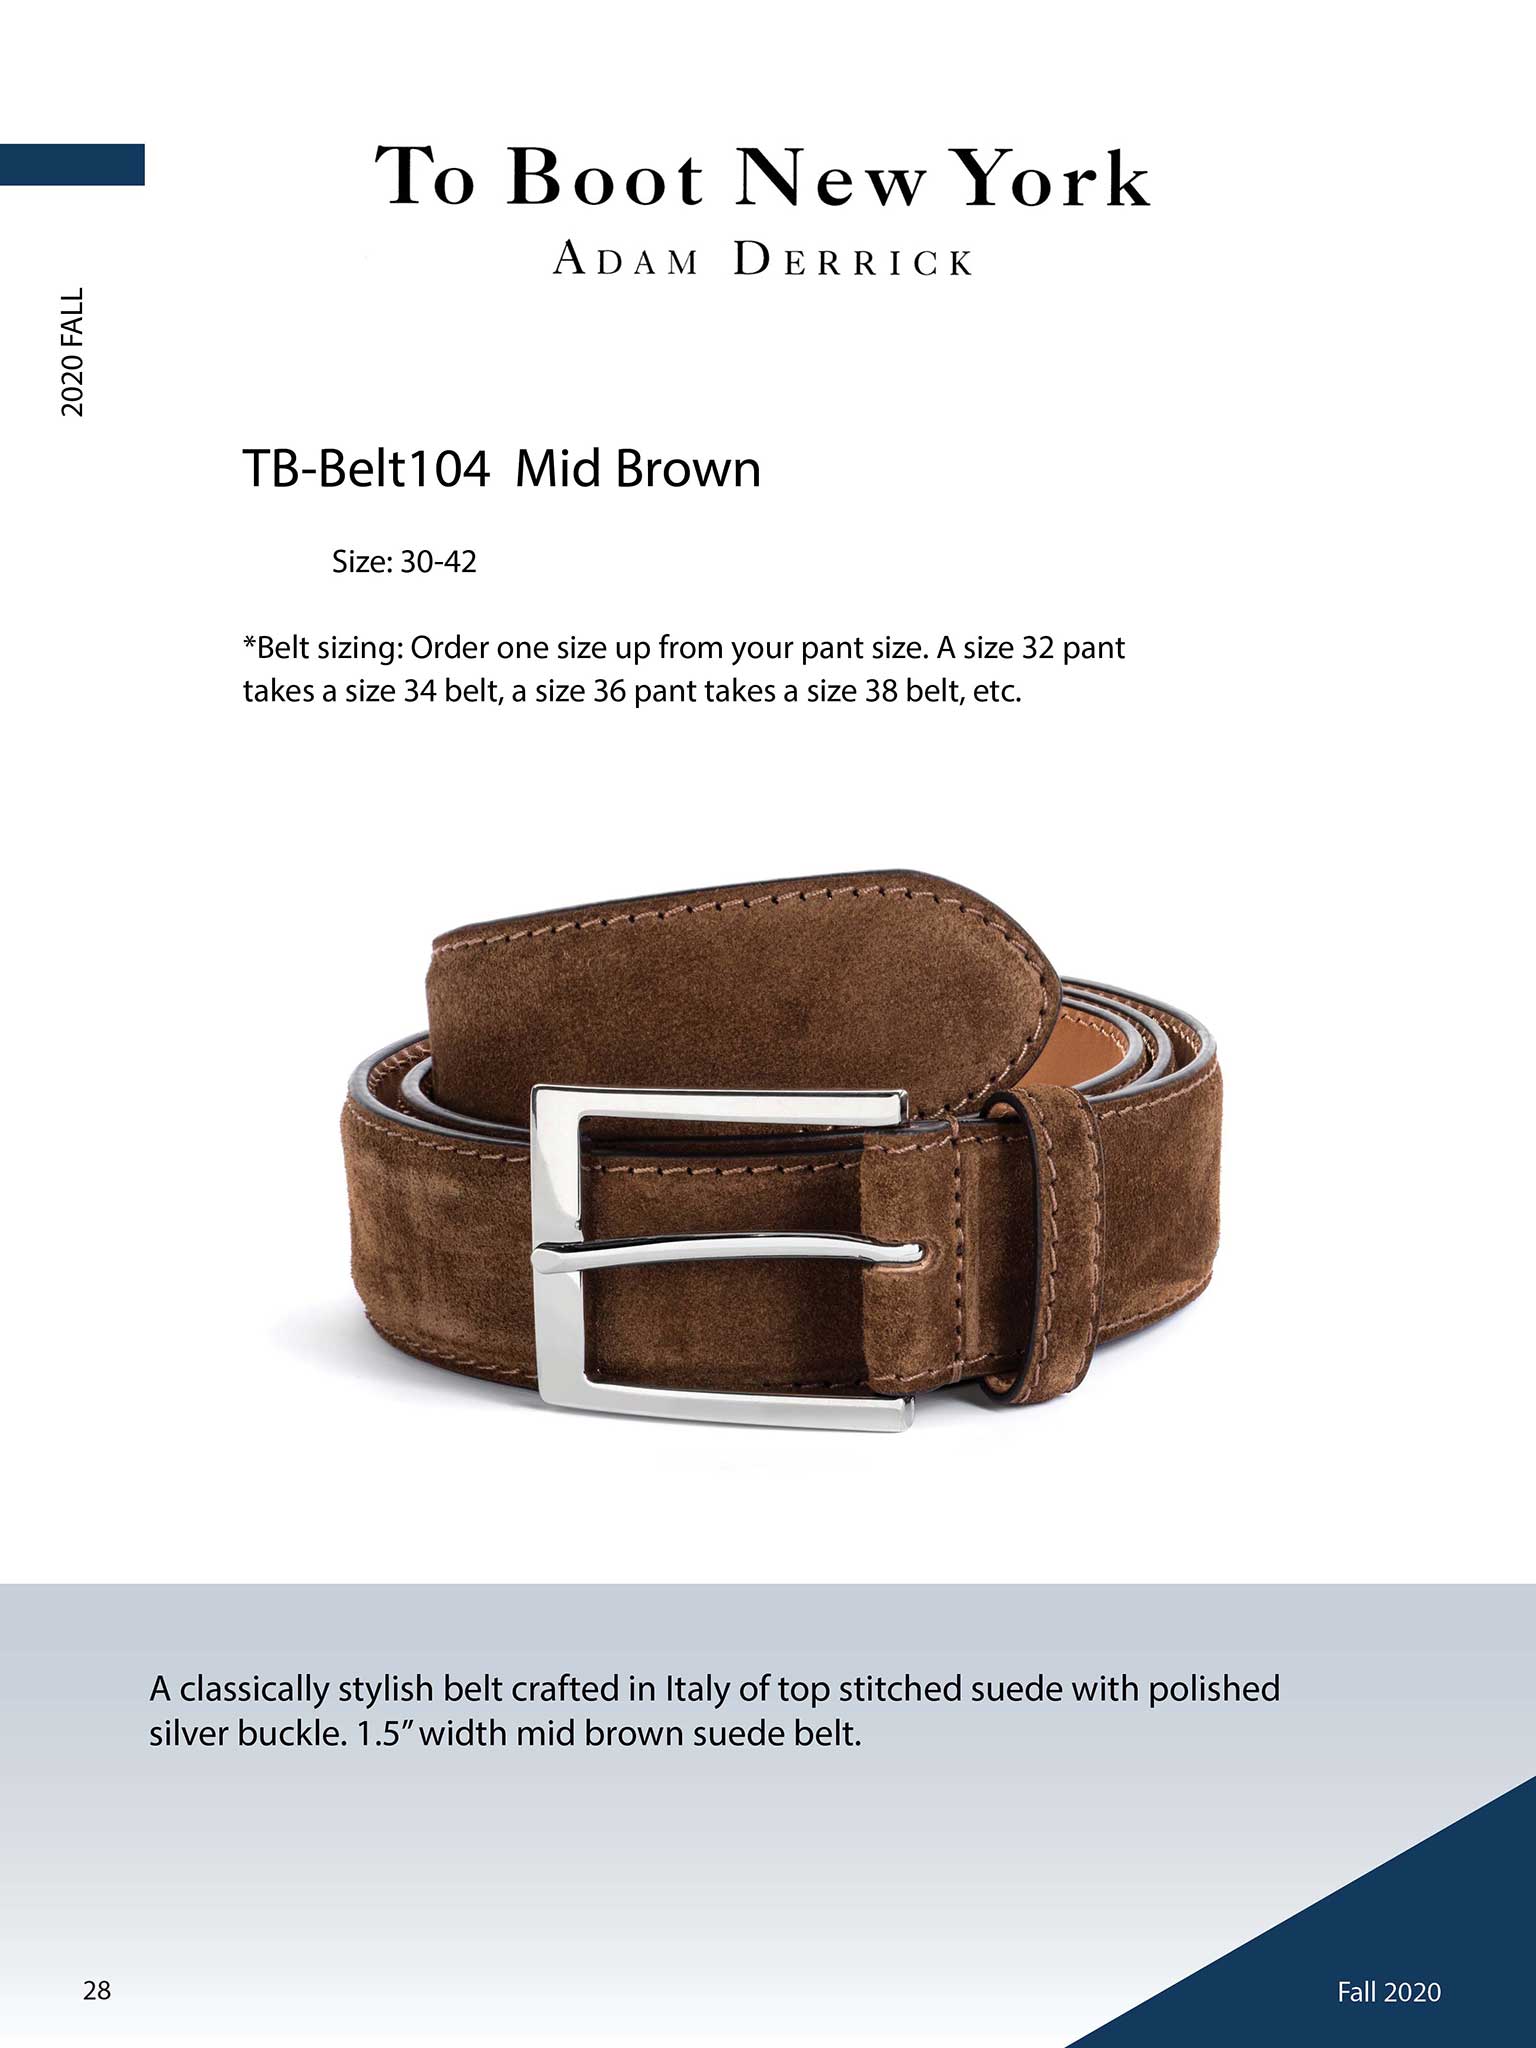 Mid Brown Suede Belt by To Boot New York